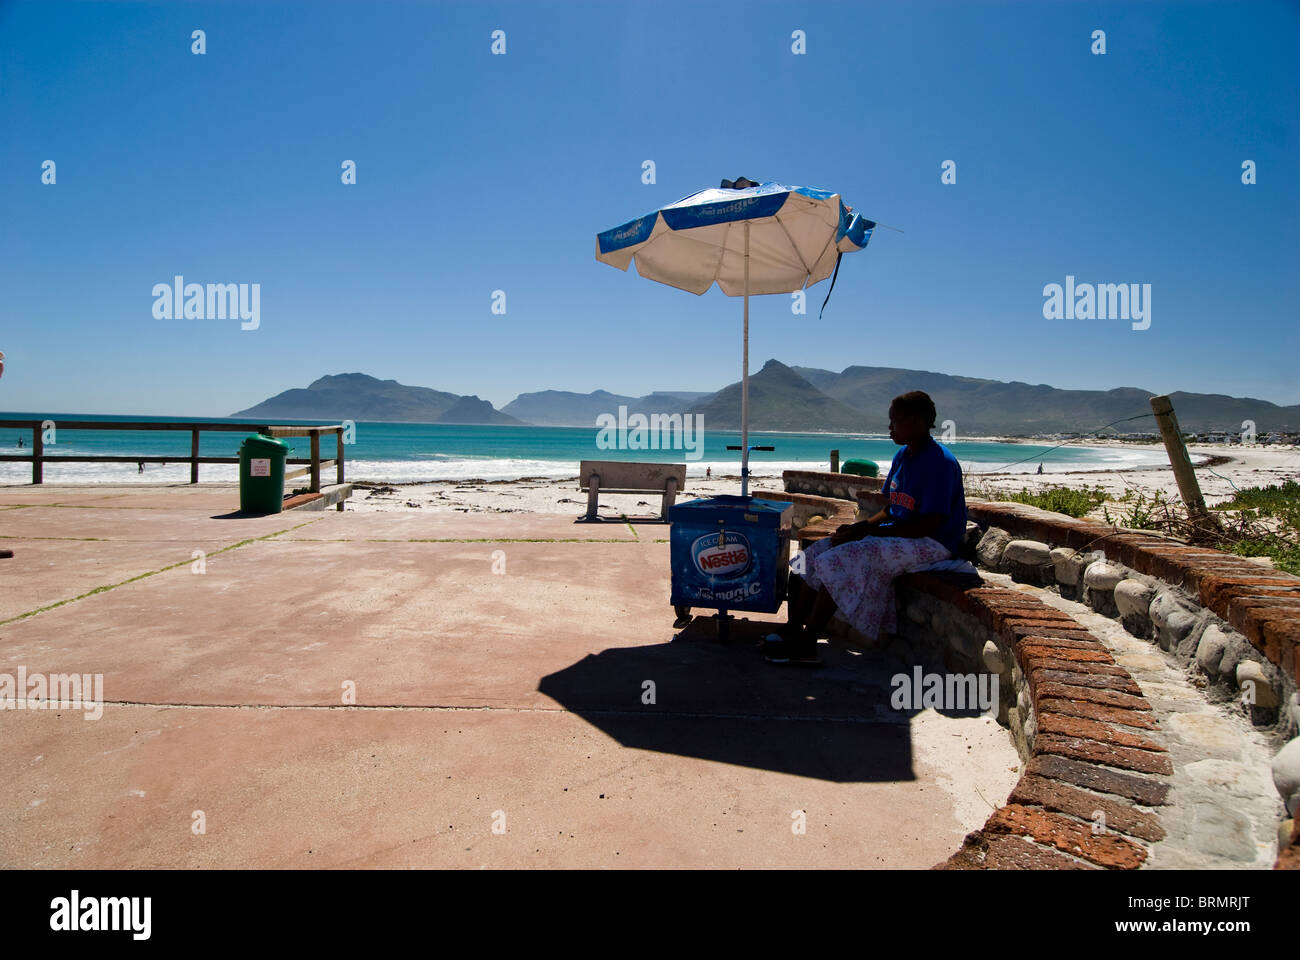 Ice Cream seller sitting in the shade of an umbrella in the parking area at Kommetjie beachfront Stock Photo